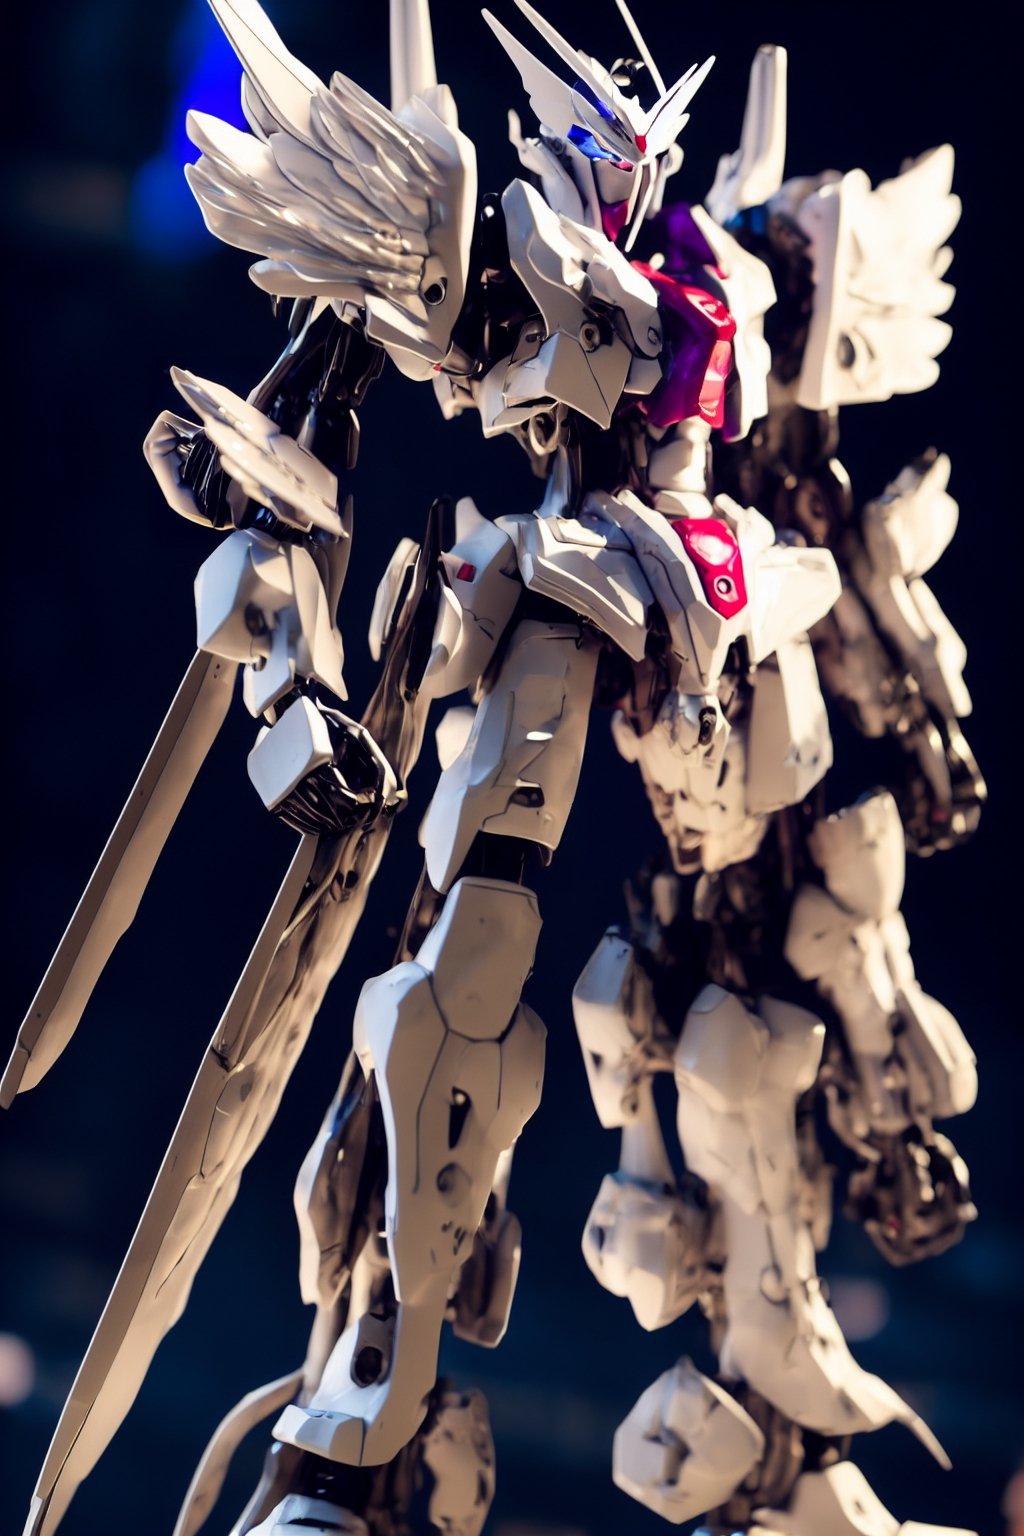 BJ_Gundam, wings, solo, blue_eyes, weapon, wings, gun, no_humans, glowing, robot, mecha, clenched_hands, floating, science_fiction, mechanical_wings, v-fin,cinematic lighting,strong contrast,high level of detail,Best quality,masterpiece,White background,. Extremely high-resolution details,photographic,realism pushed to extreme,fine texture,incredibly lifelike,BJ_Gundam,Big Gun, explosion, 